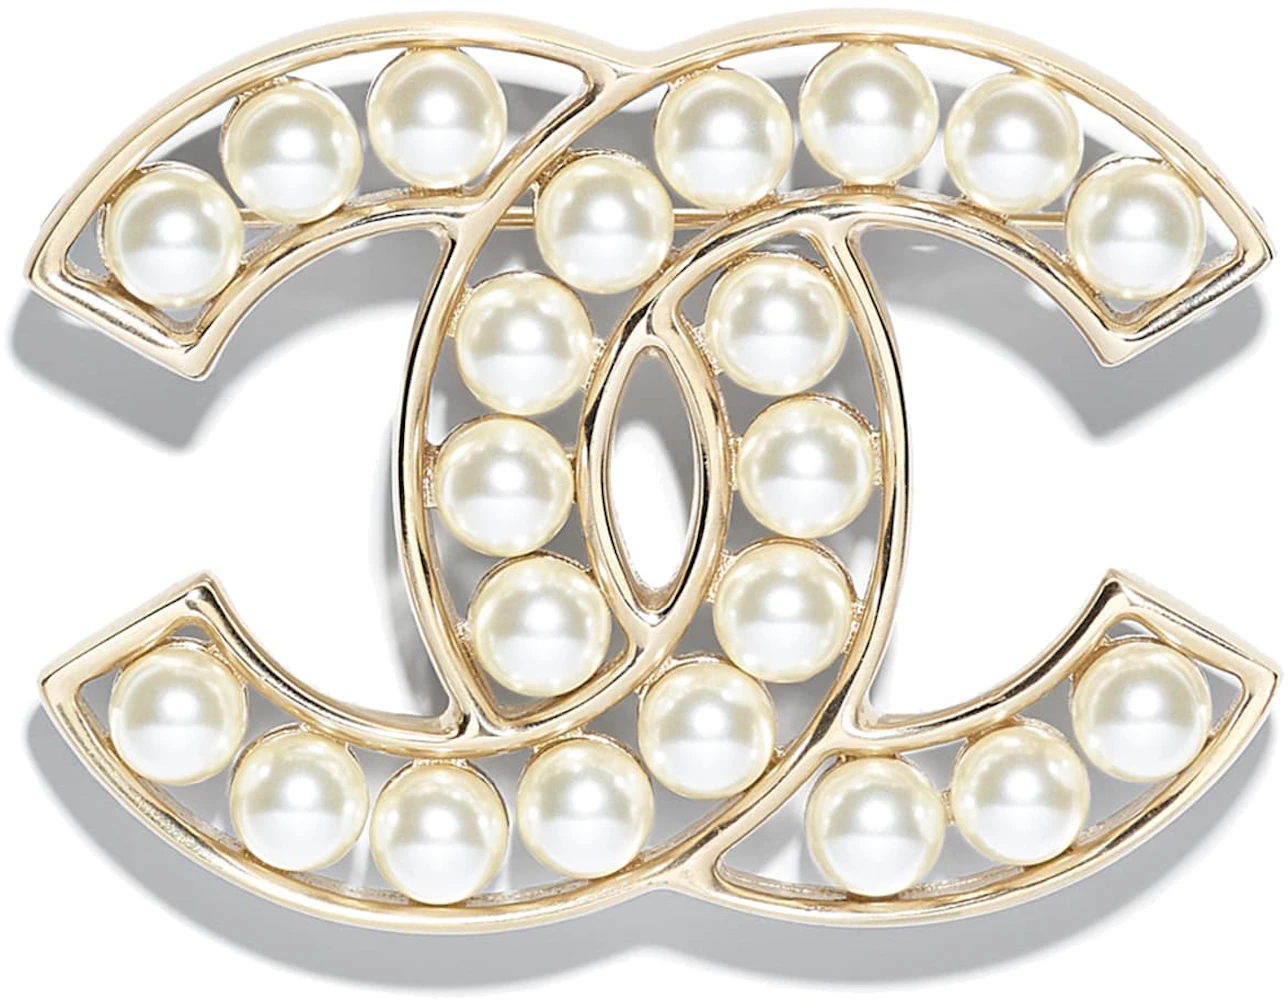 CHANEL 2019 GOLDEN TONE CC LOGO WHITE CRYSTALS ROUND BROOCH PIN CHARM –  Miami Lux Boutique